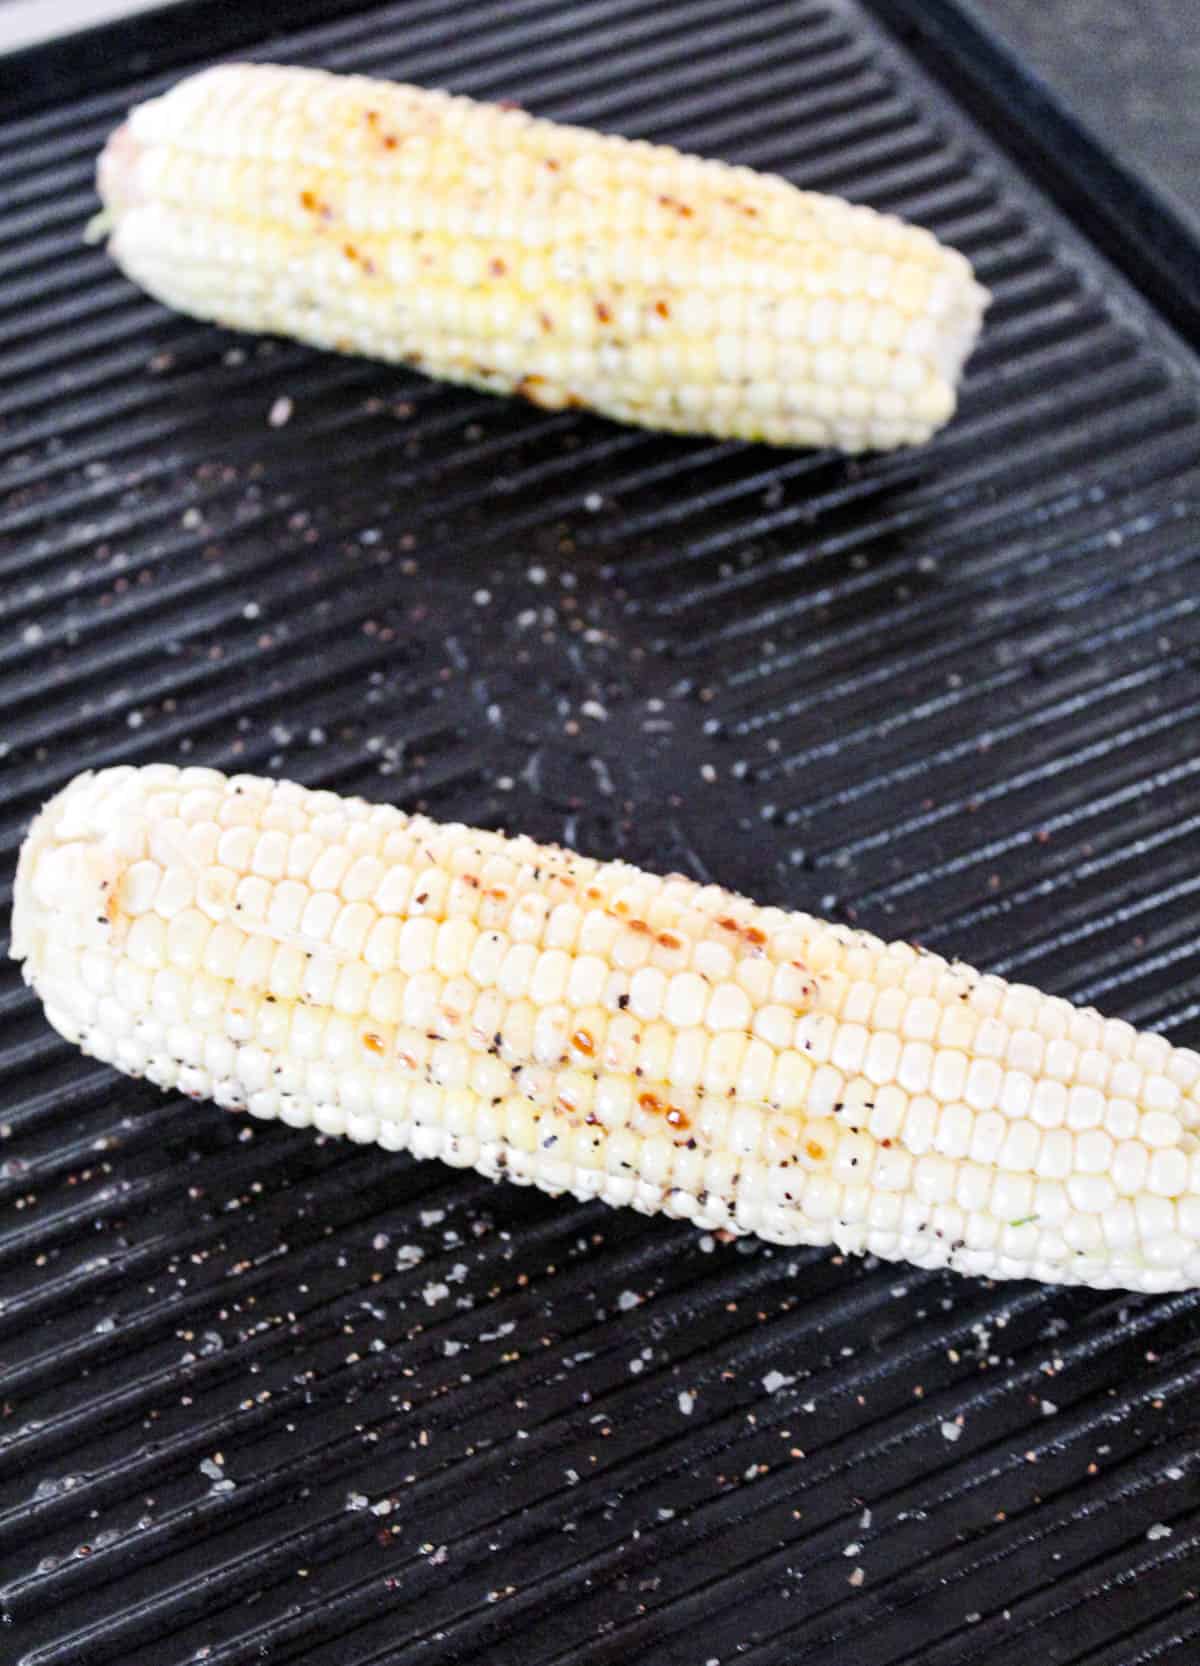 Two corn cobs on the grill with grill marks.